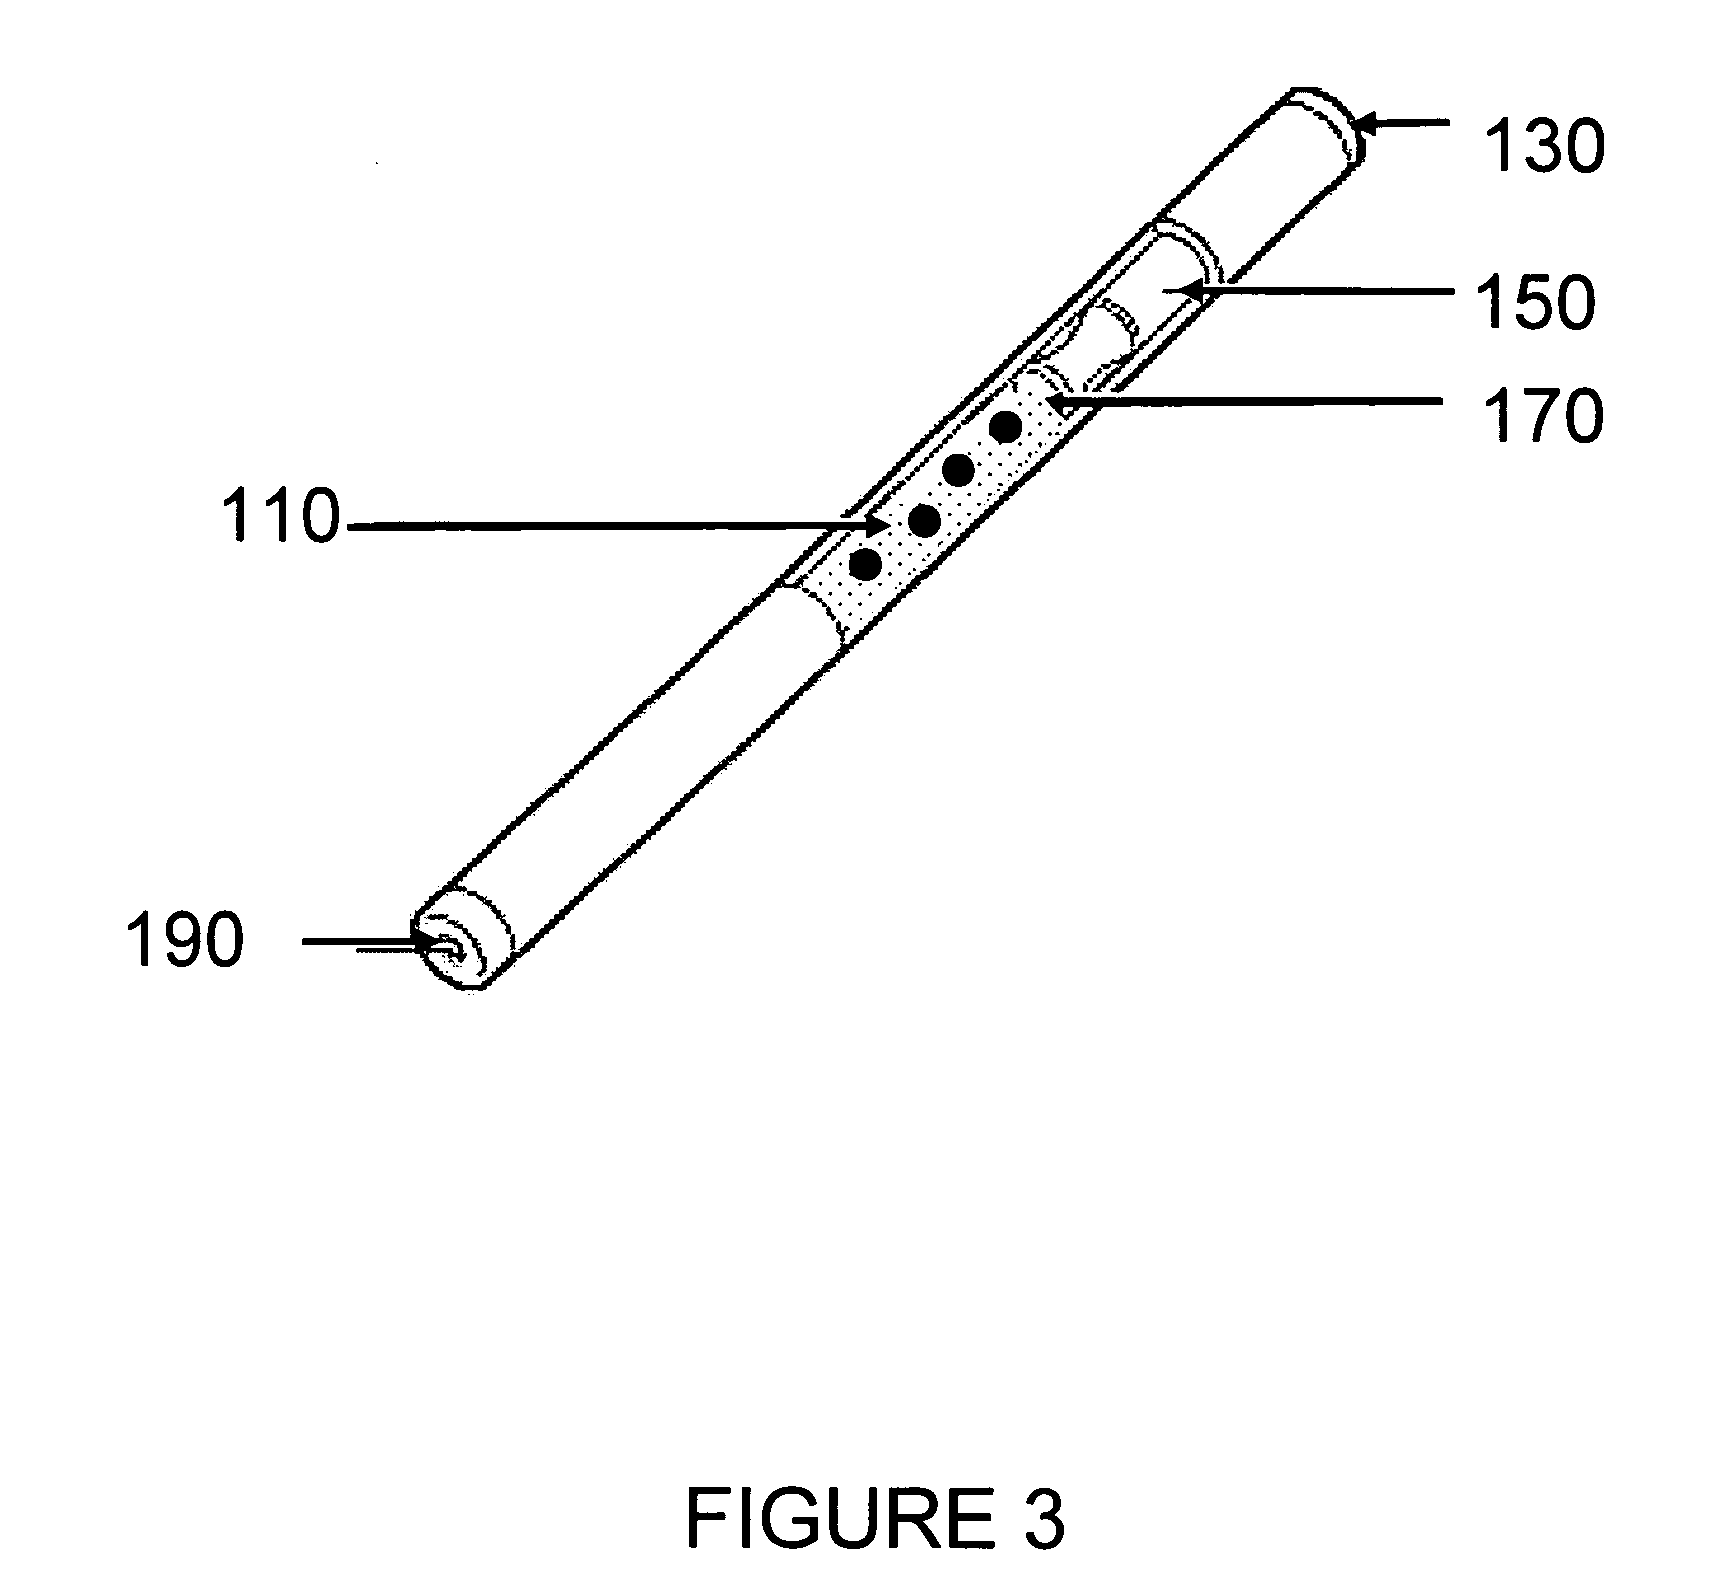 Density-matched suspension vehicles and pharmaceutical suspensions